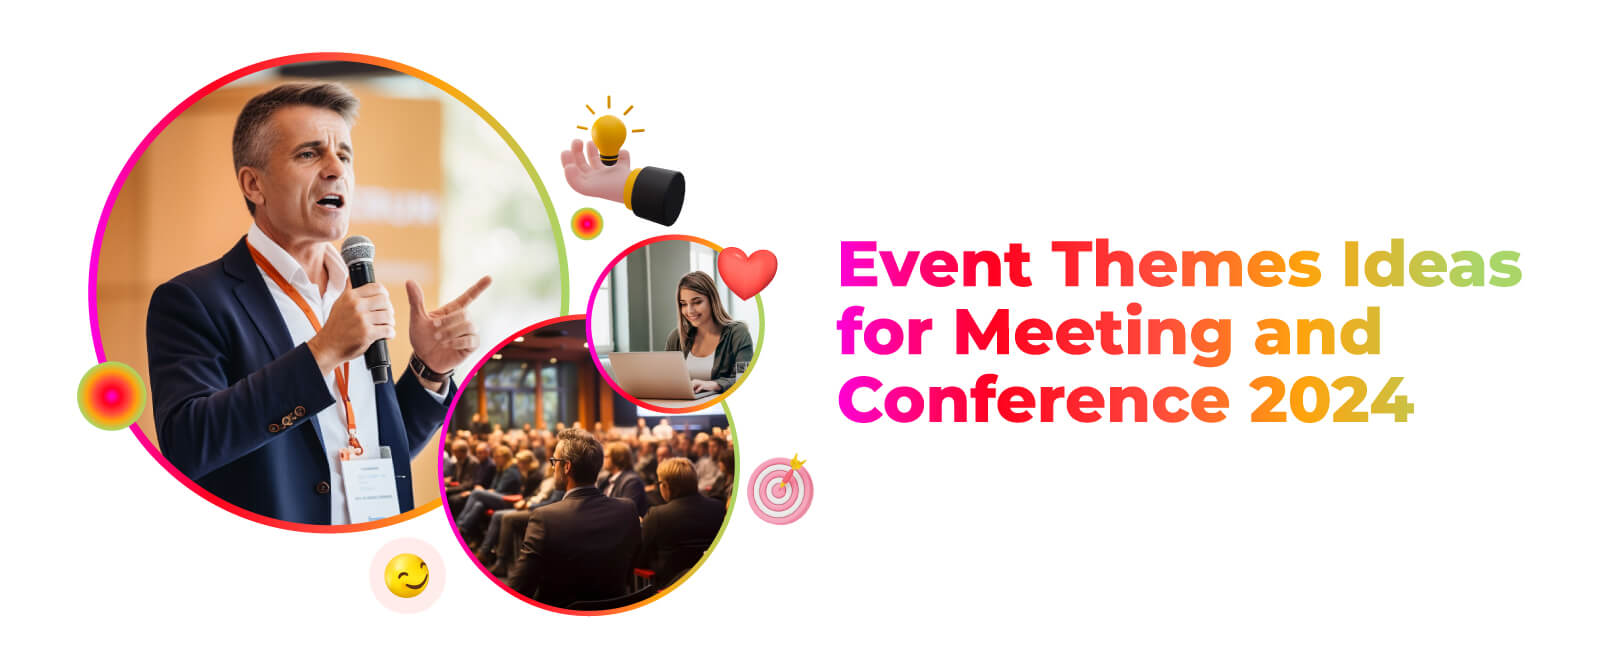 Event Themes Ideas for Meeting and Conference 2024